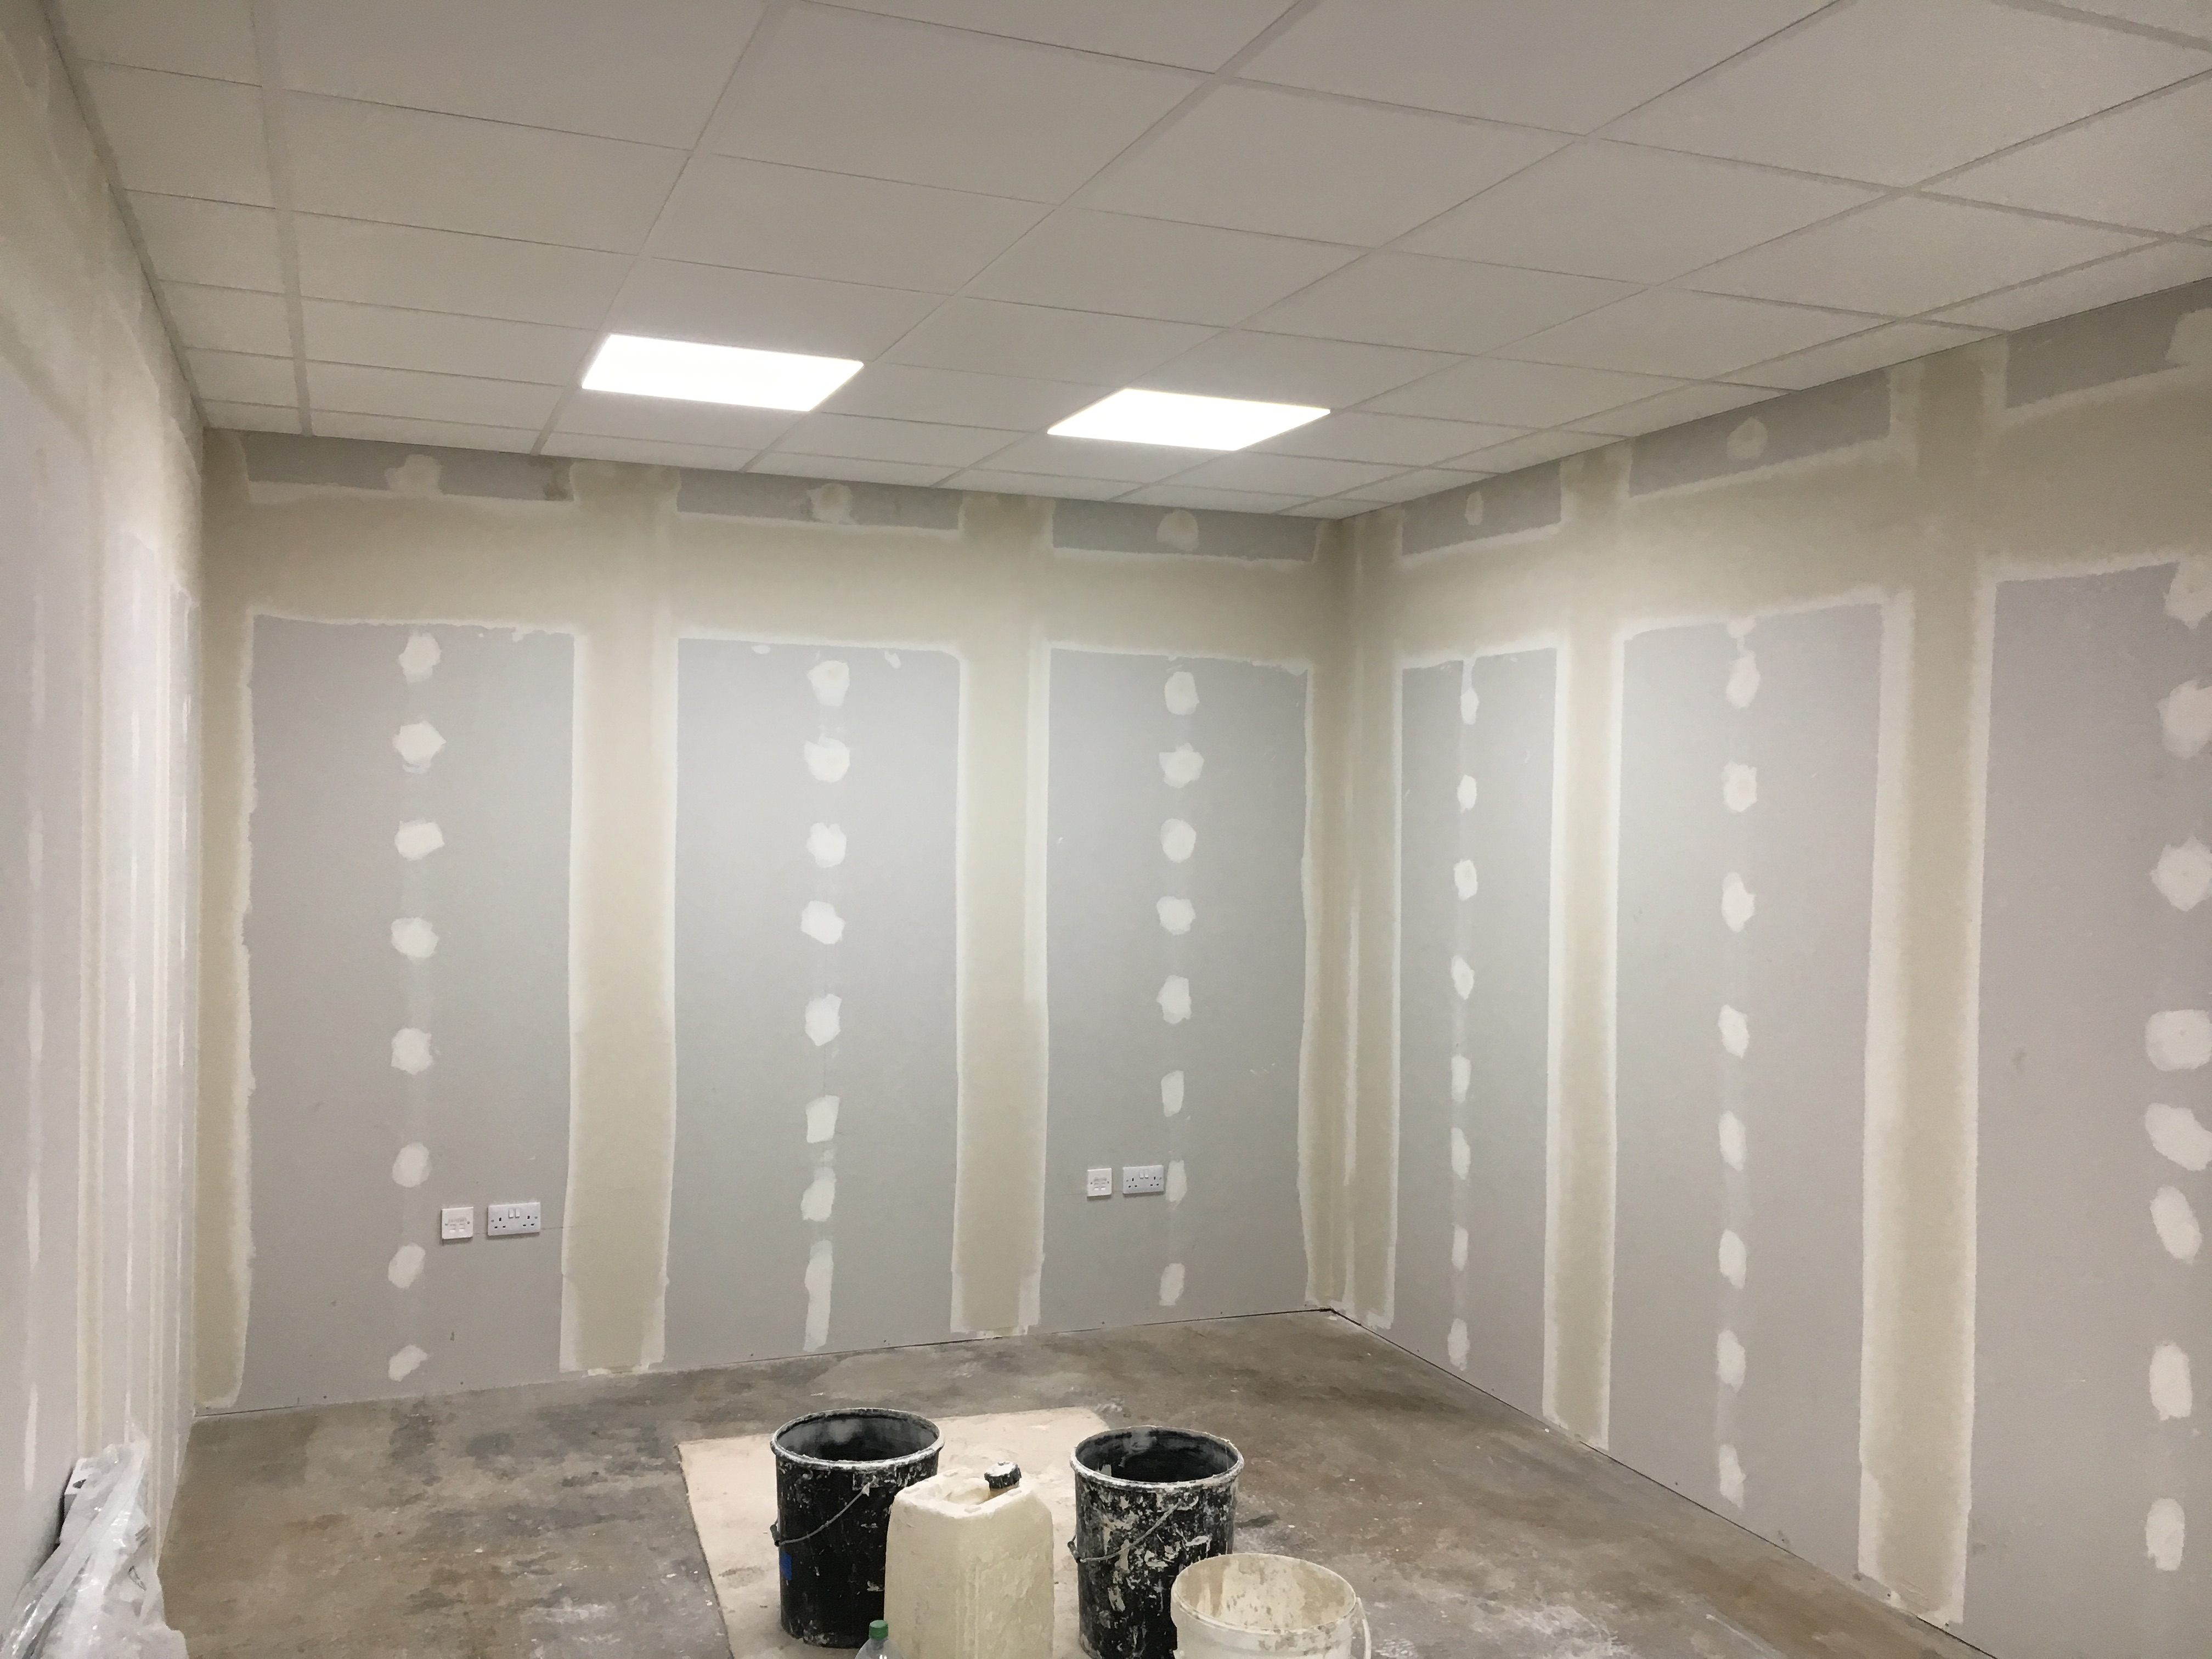 A recent plastering project showcasing the Dot and Dab plastering method